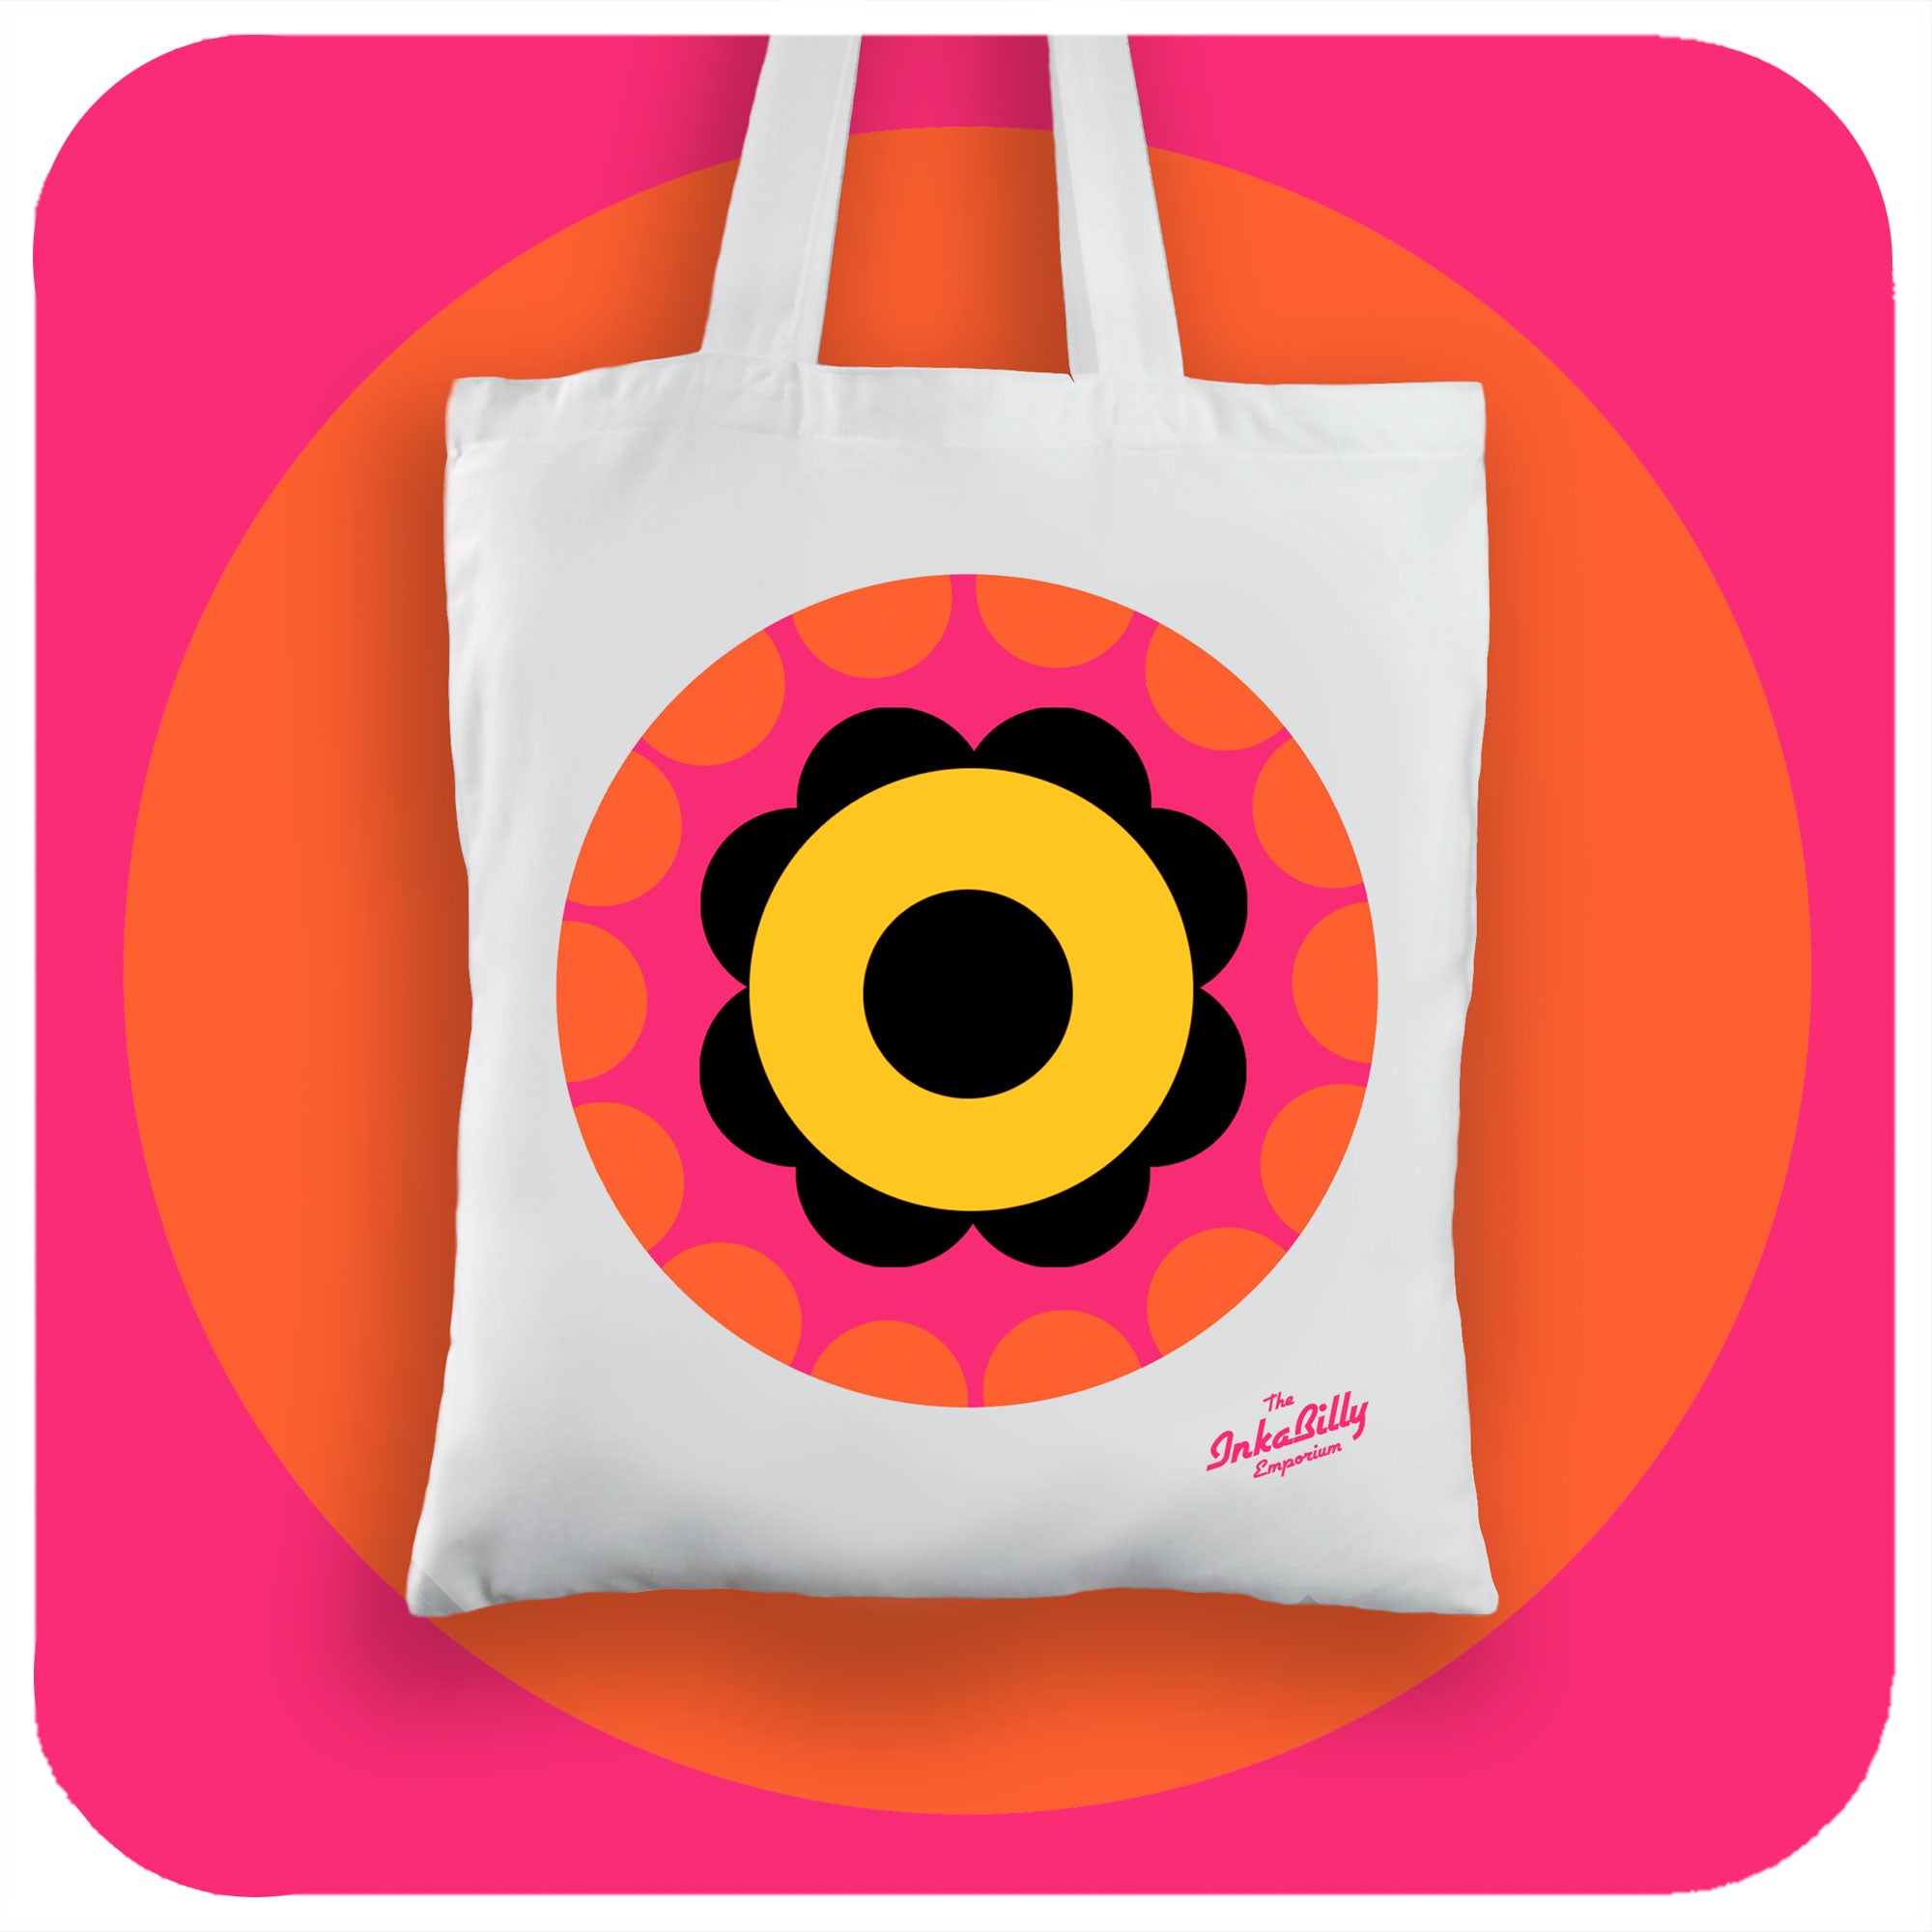 Funky Tote Bags For Spring And Summer Travel